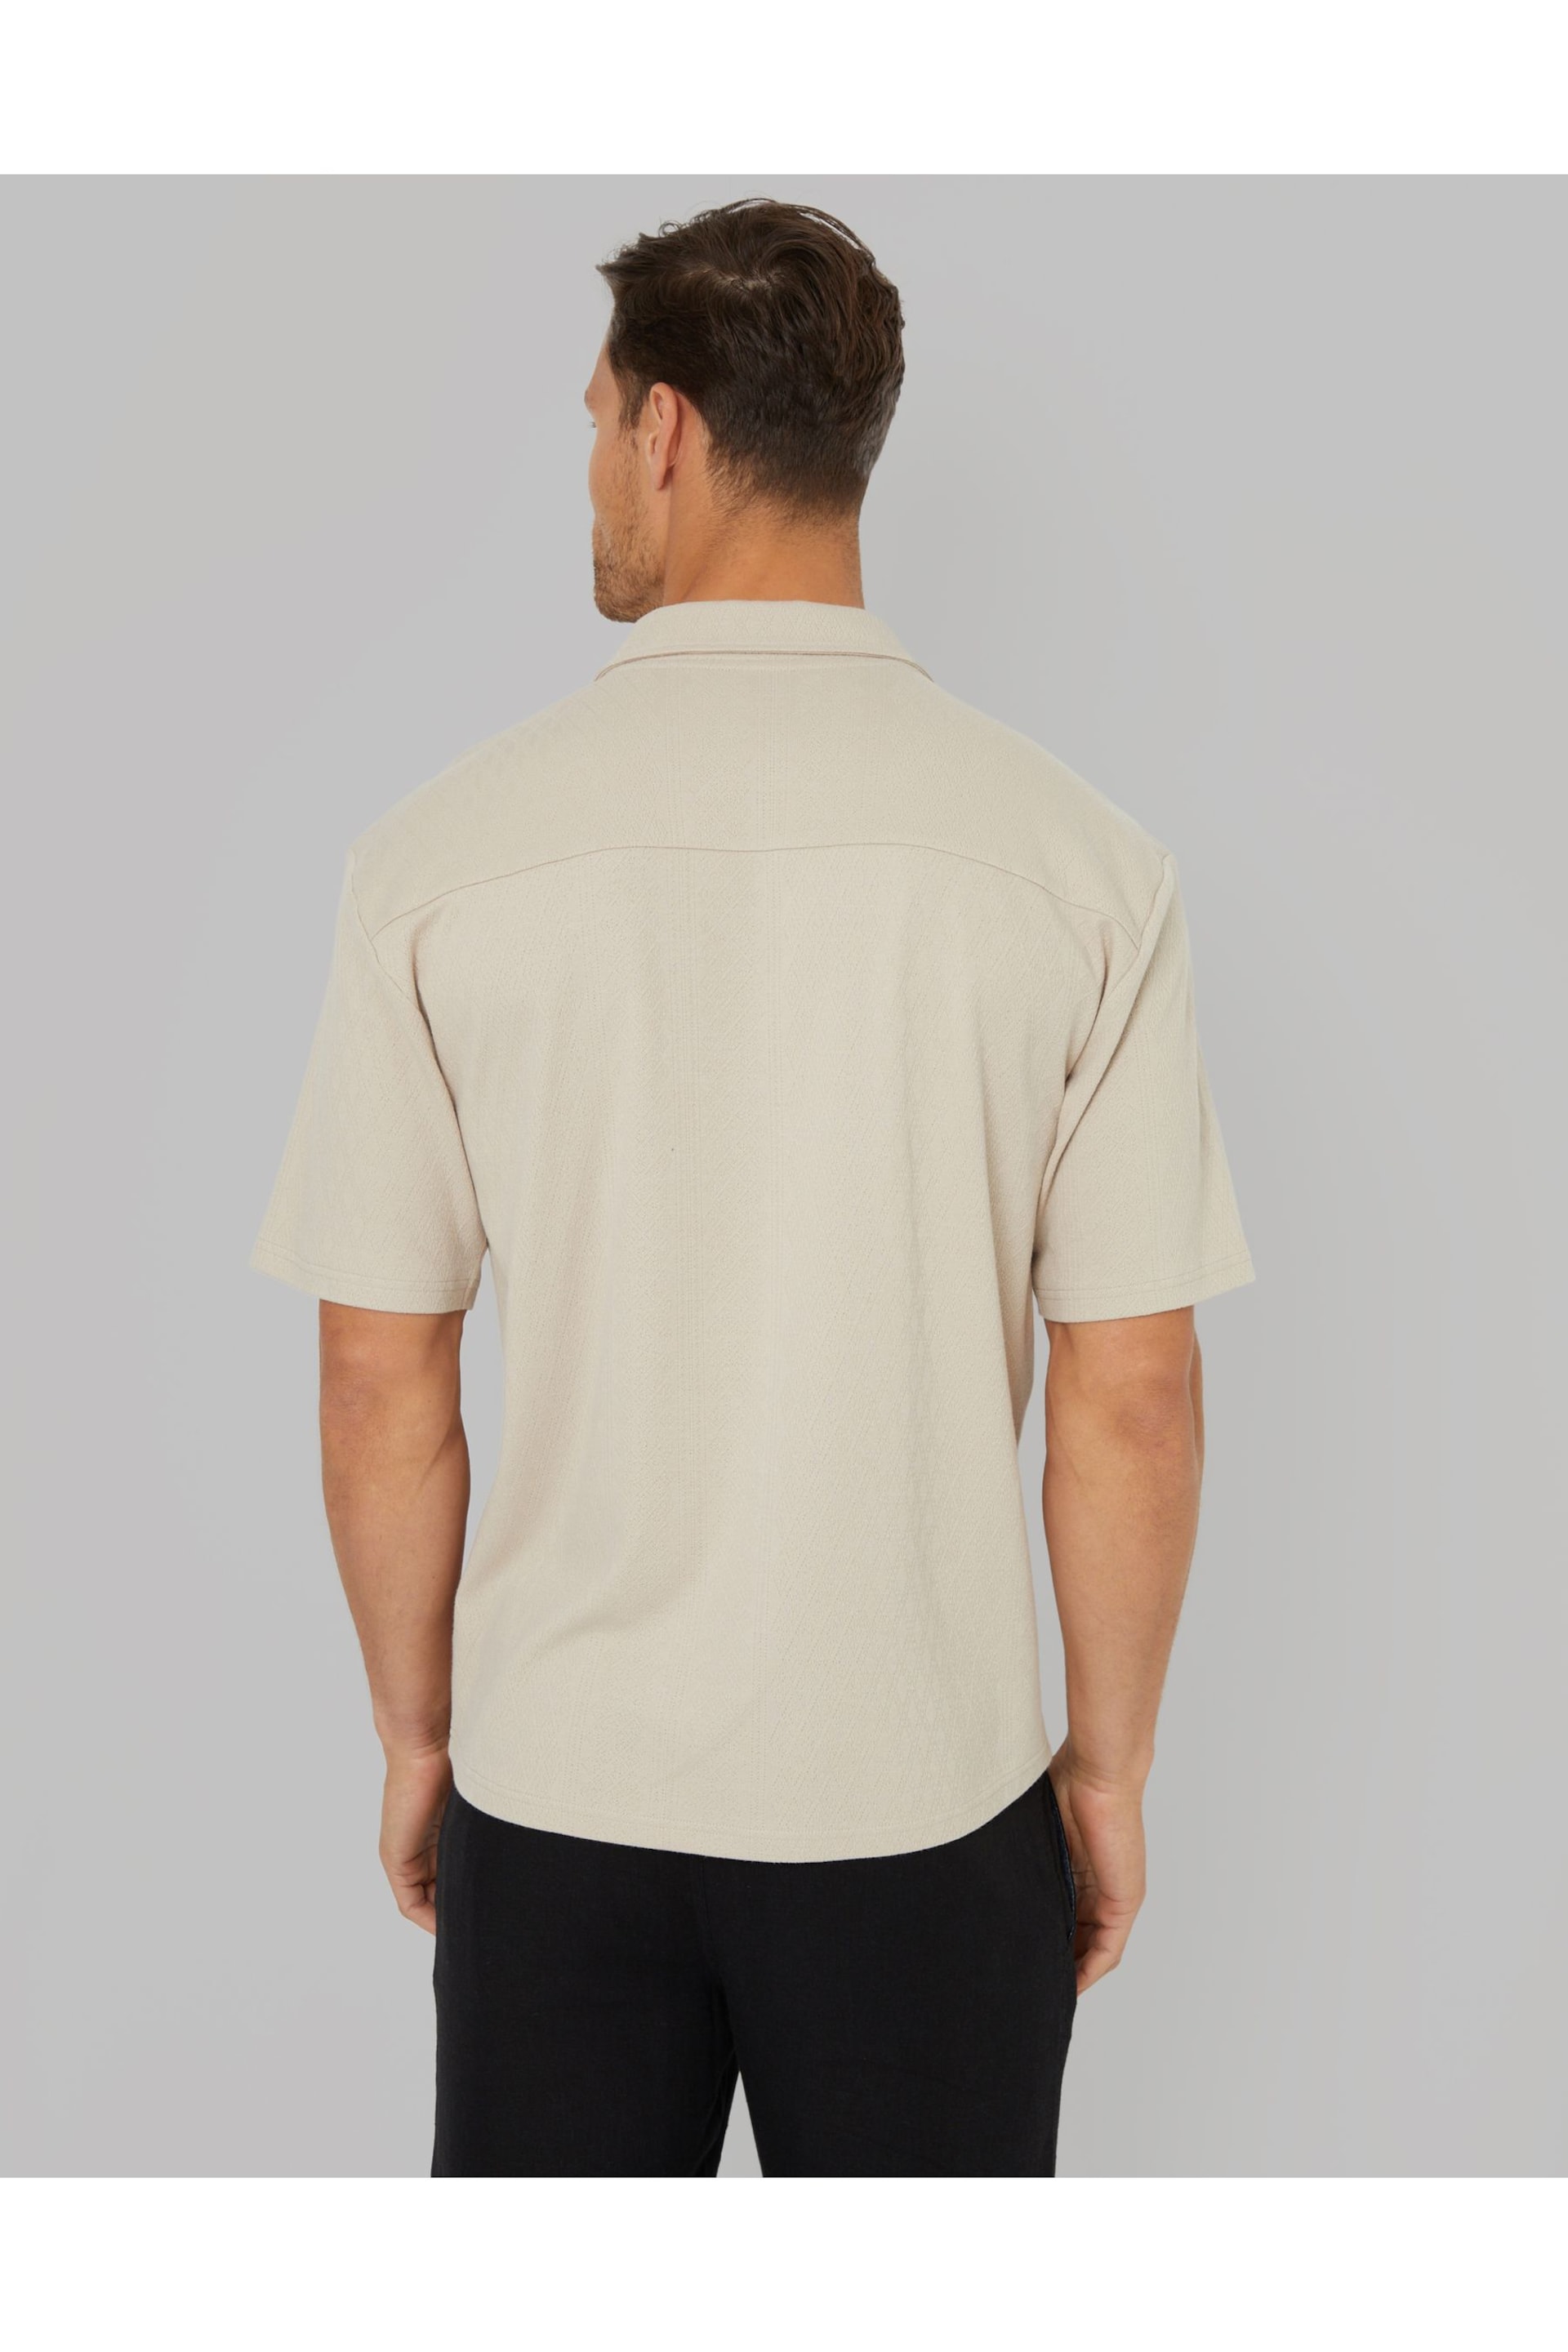 Threadbare Brown Textured Short Sleeve Cotton Shirt With Stretch - Image 2 of 4